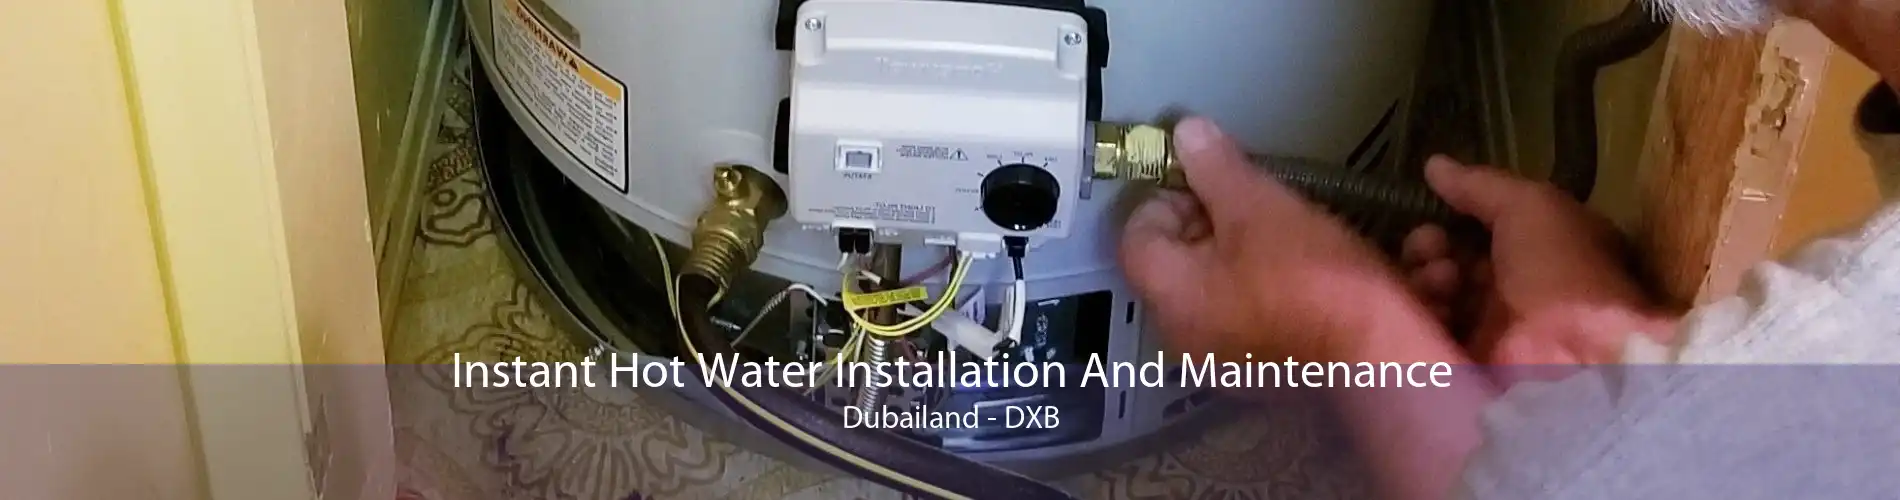 Instant Hot Water Installation And Maintenance Dubailand - DXB